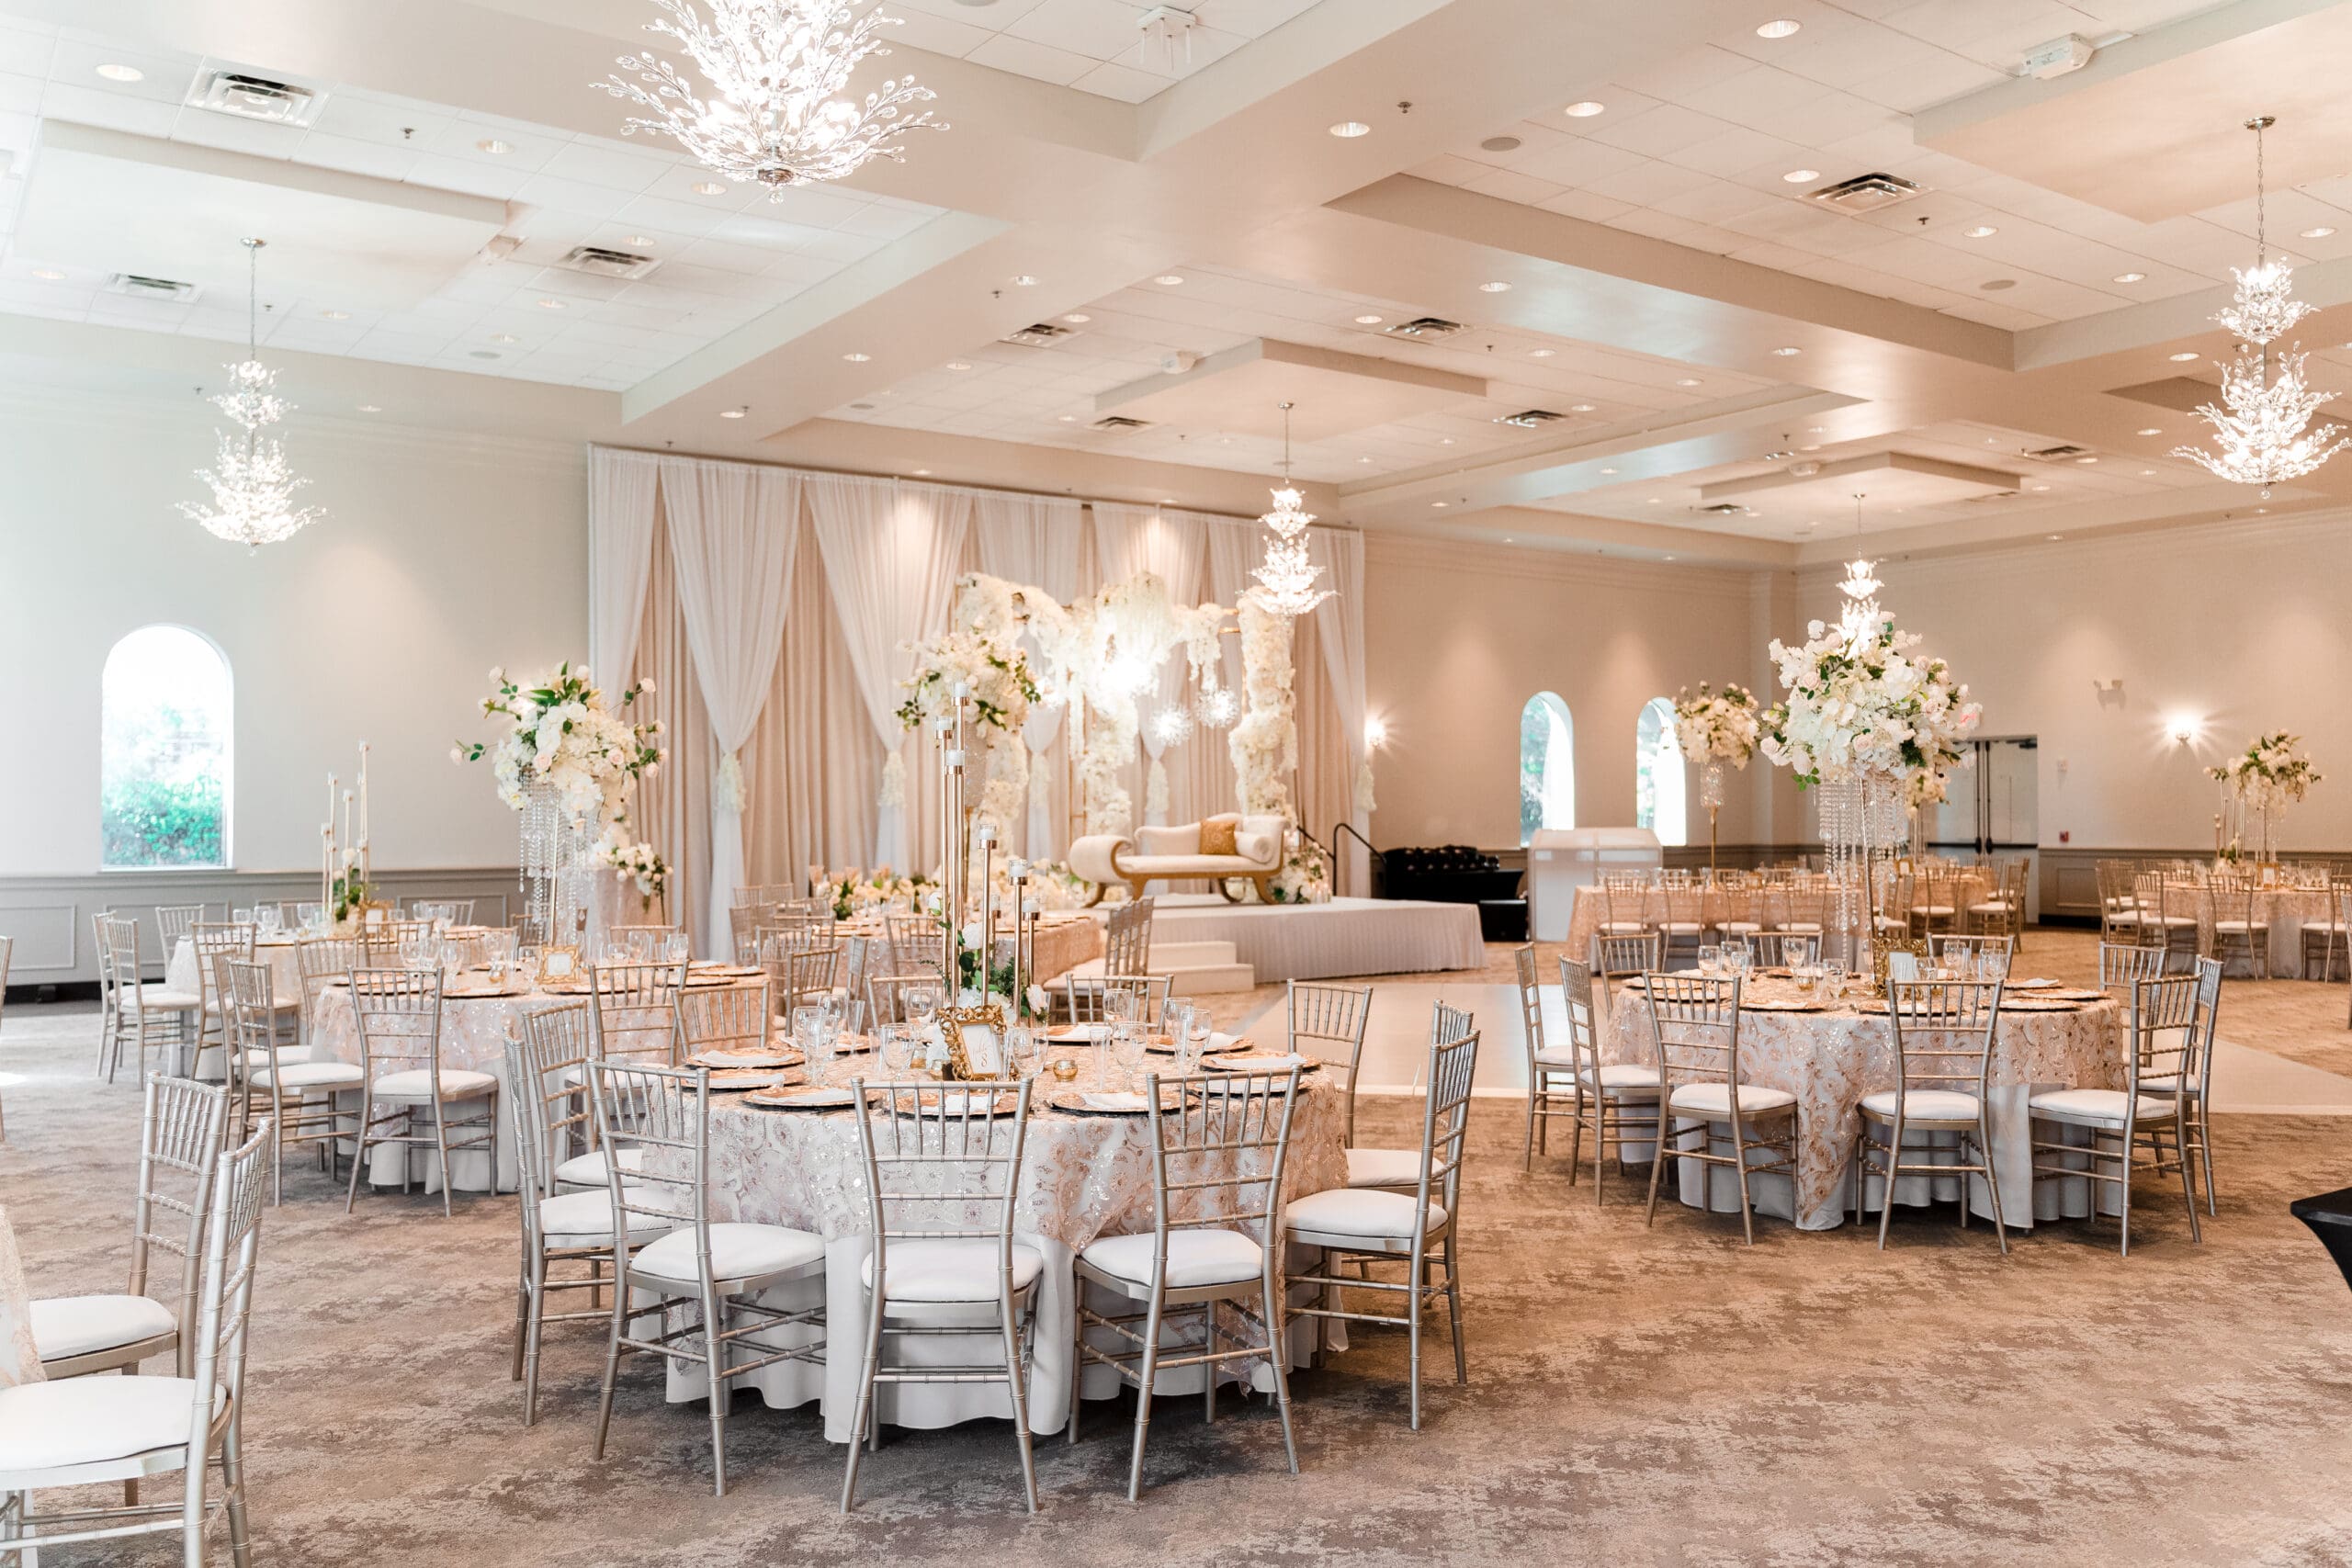 Elegant decorations of white roses and chandeliers in the Holy Trinity Reception Center